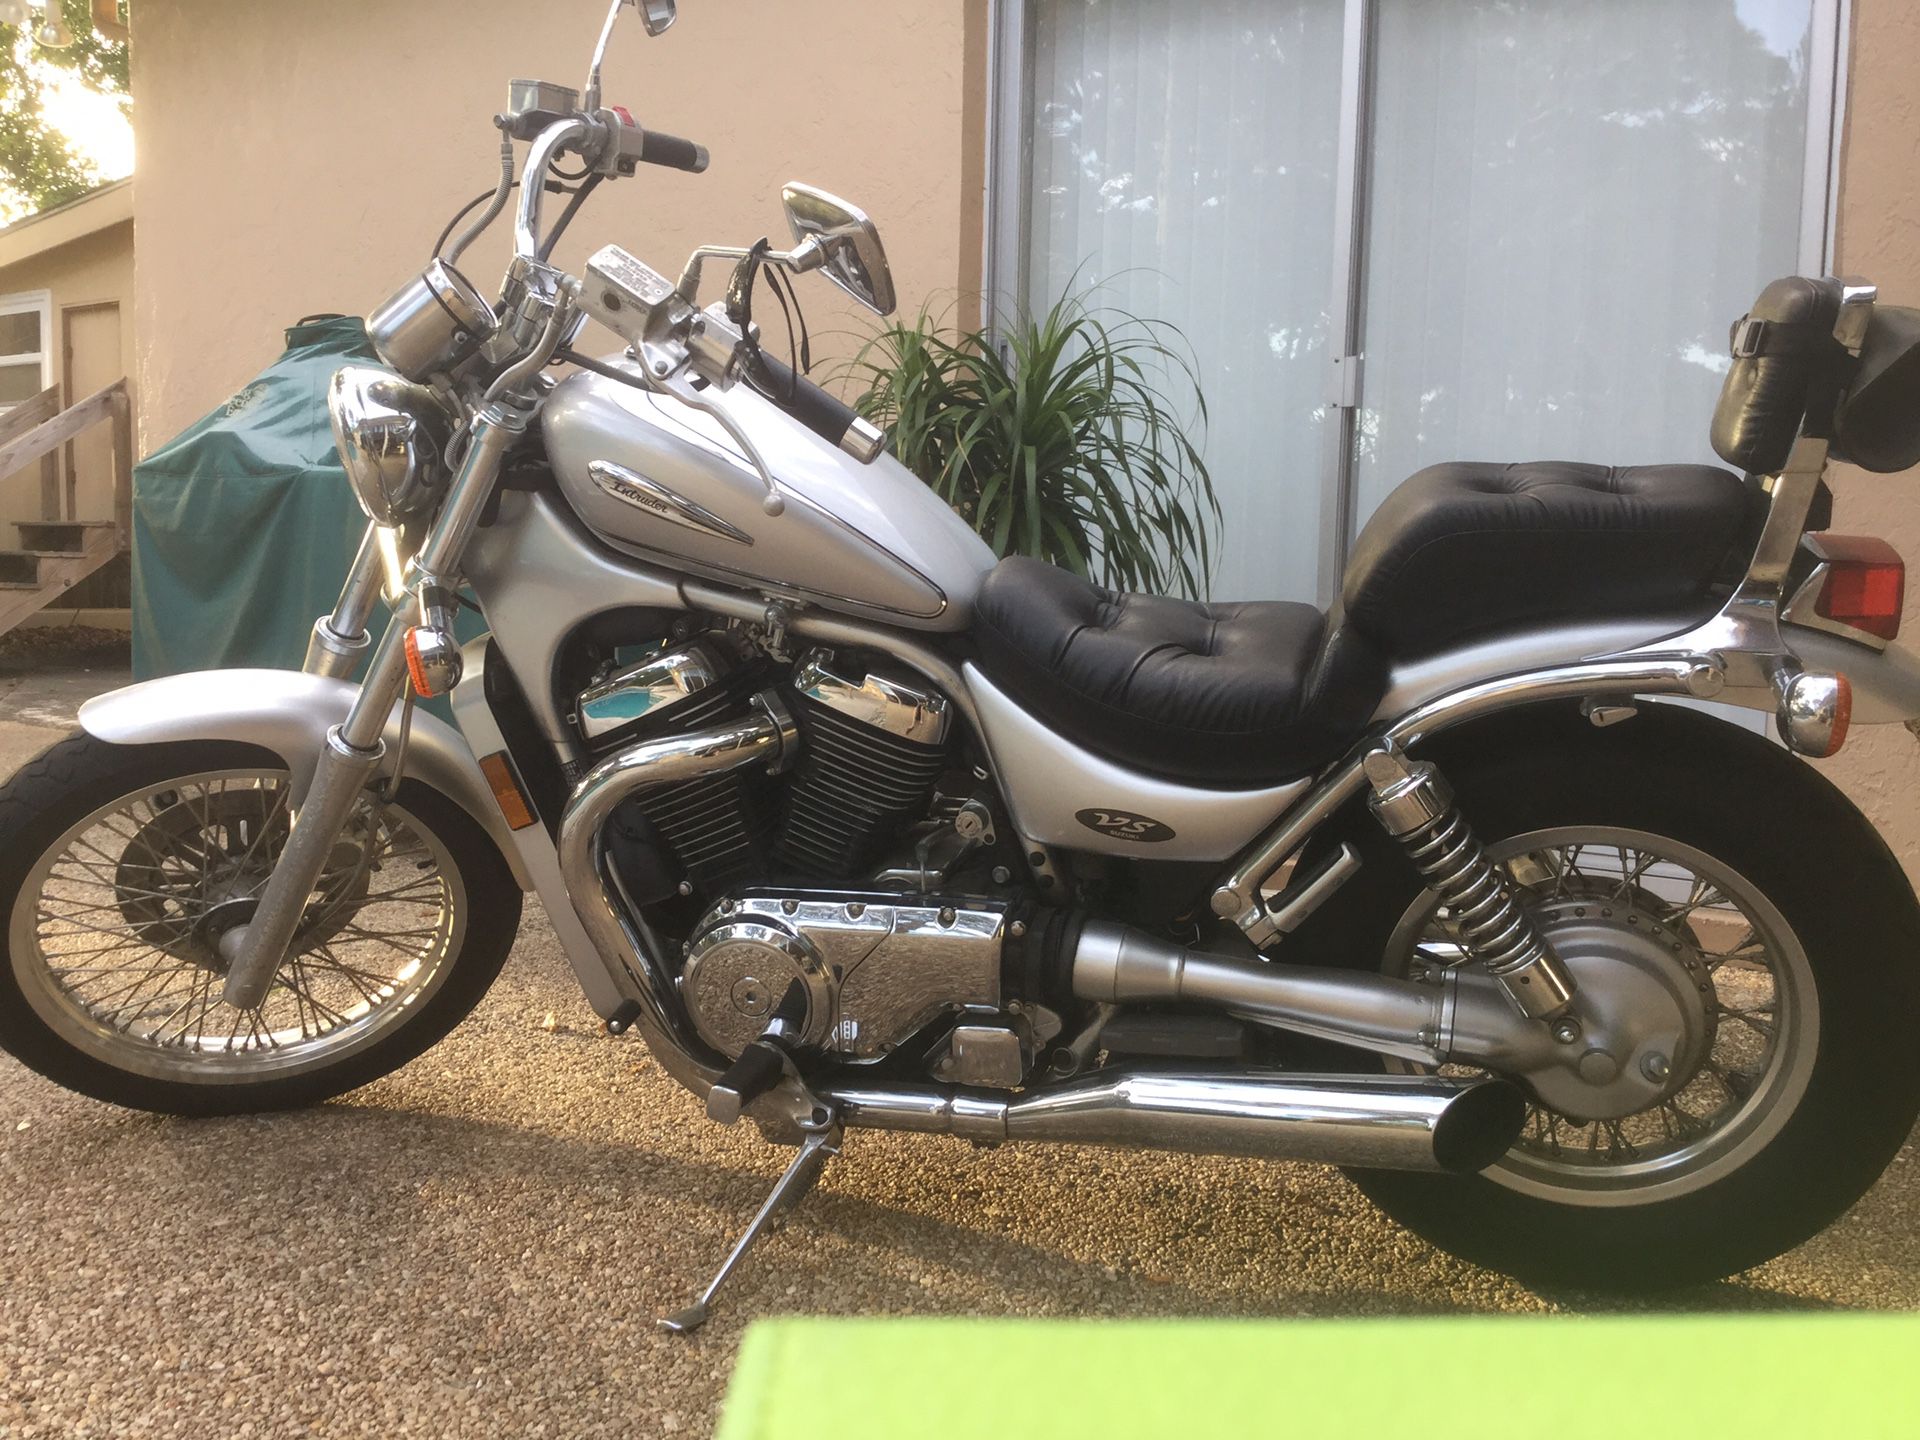 Motorcycle cruiser - 2003 Suzuki INTRUDER 800  7500 miles, black and silver, very good condition,  Great condition, Silver, Rides like new, very low